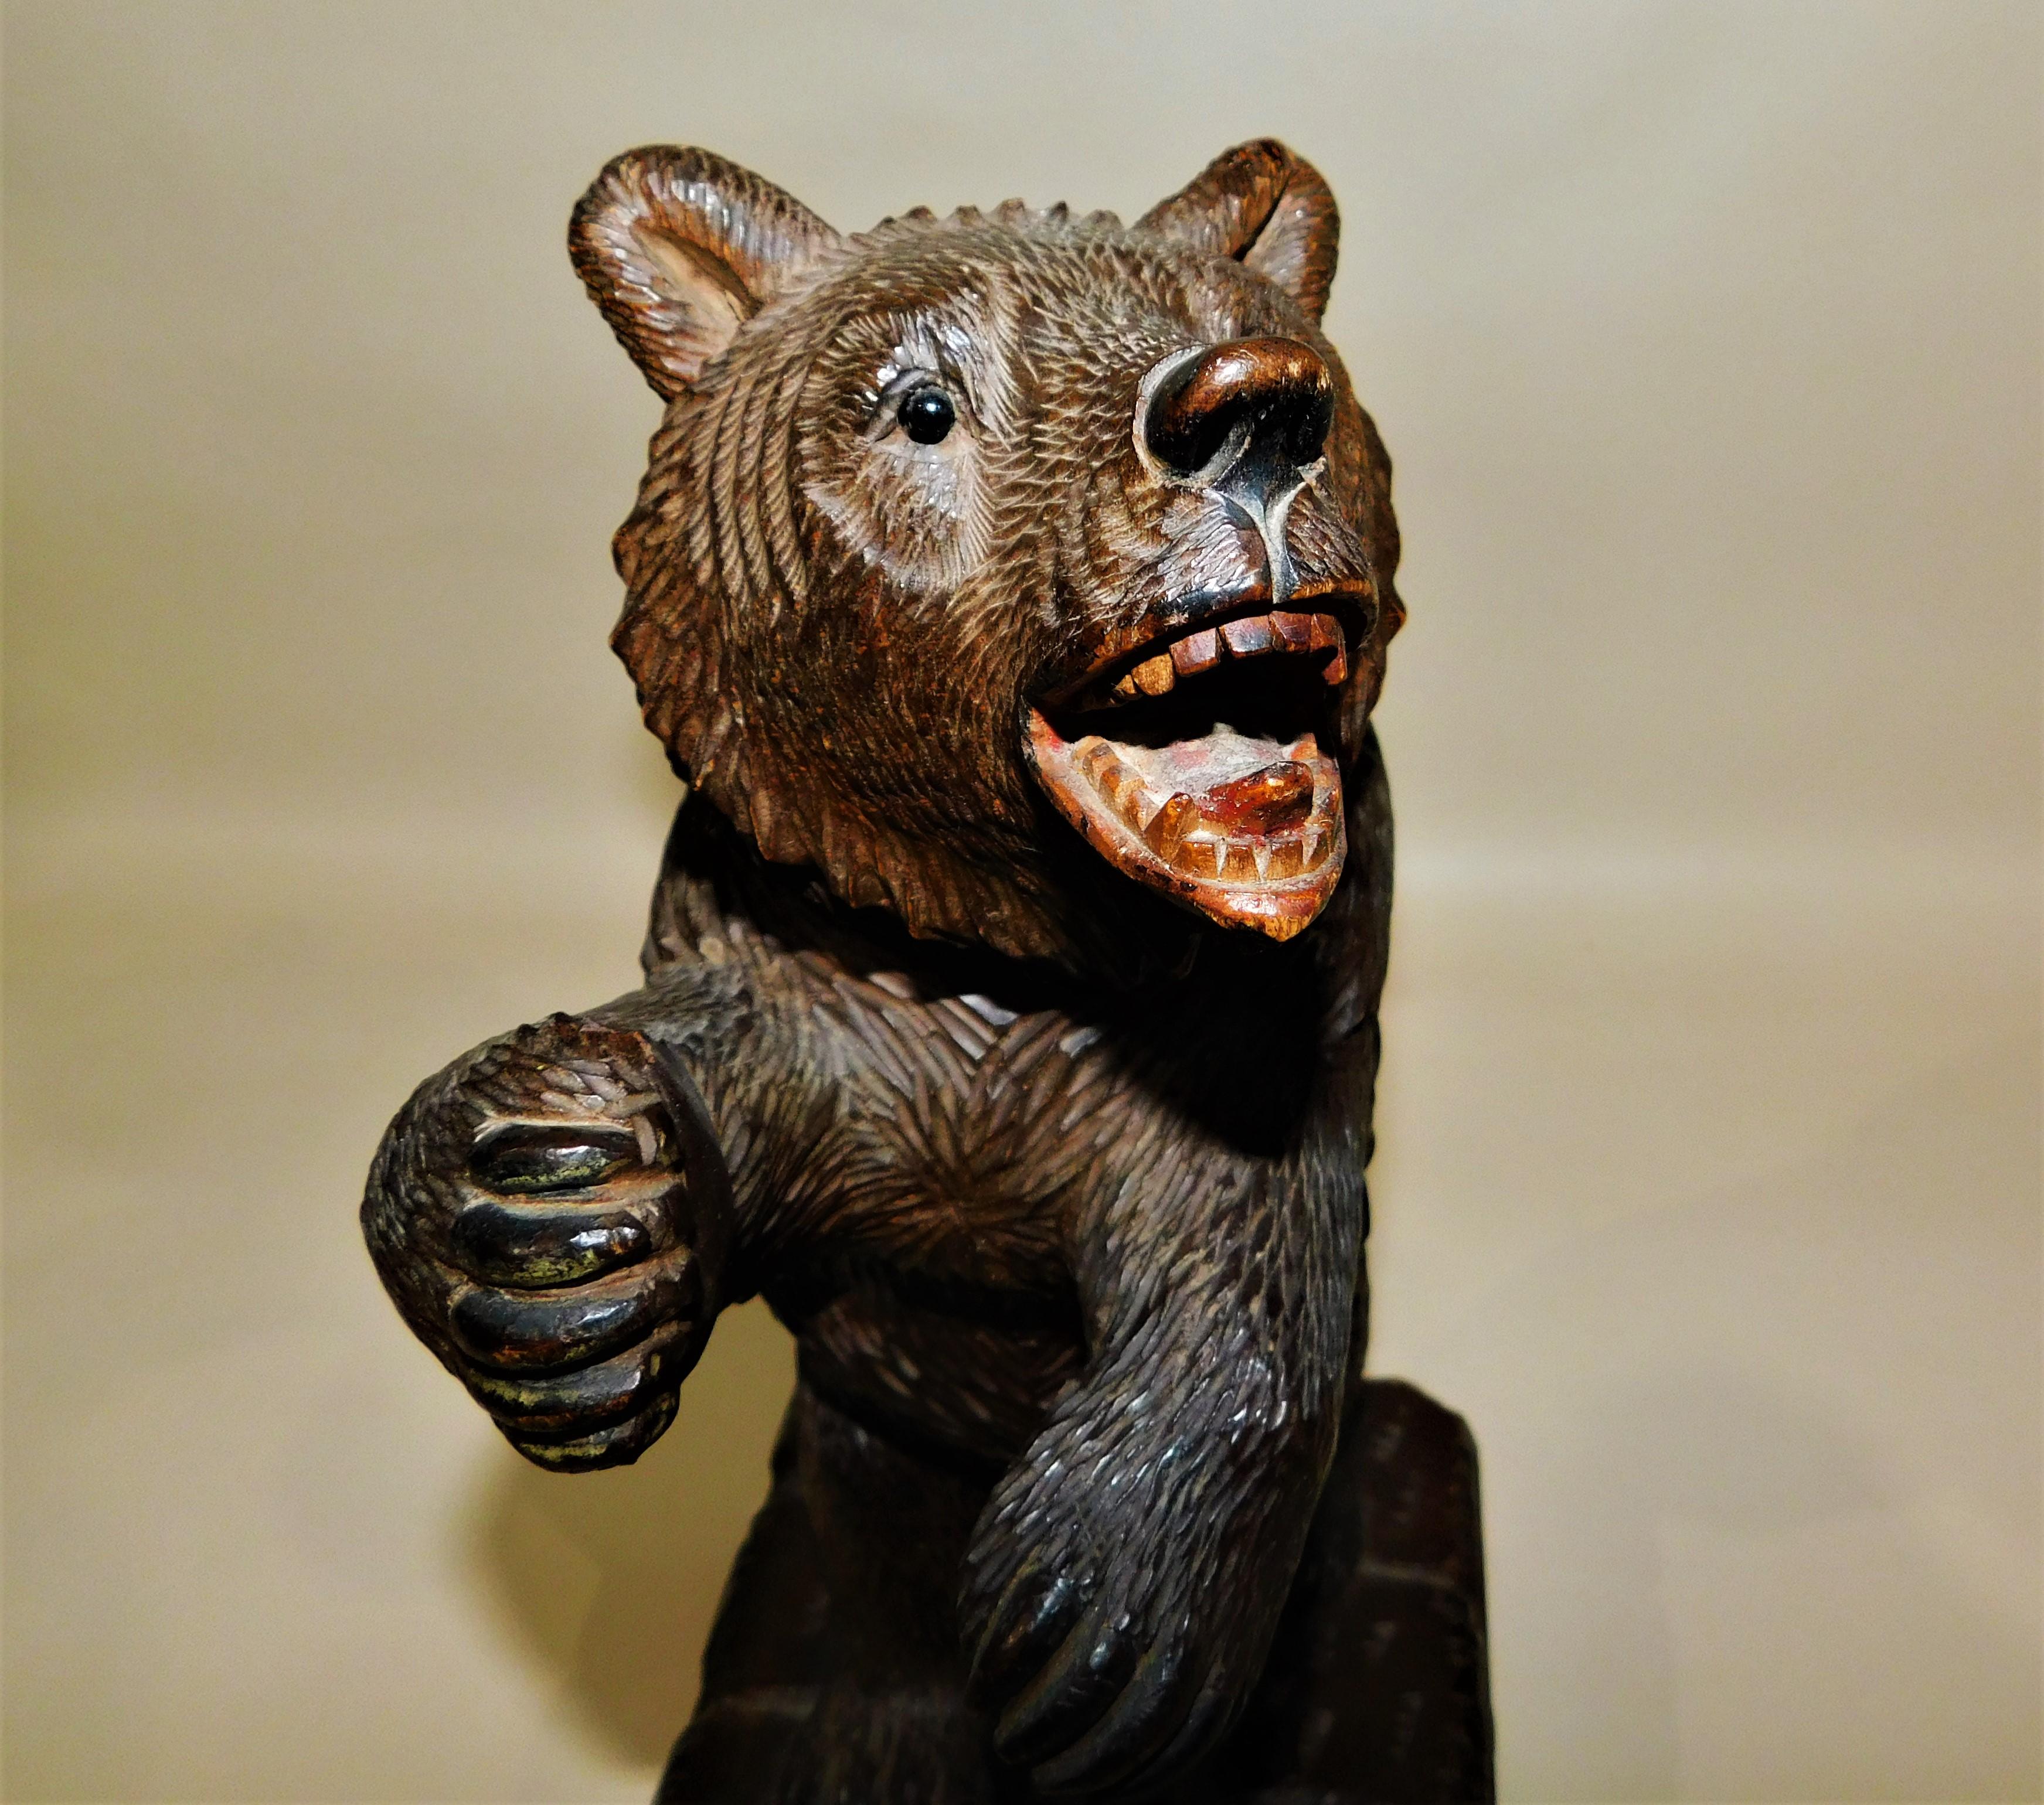 Black Forest hand-carved linden-wood hand-carved grizzly bear with glass eyes and enamel painted mouth with fangs/teeth showing on a thick base, circa 1900. See our other items for more hand-carved wood pieces.

Black Forest sculptural art